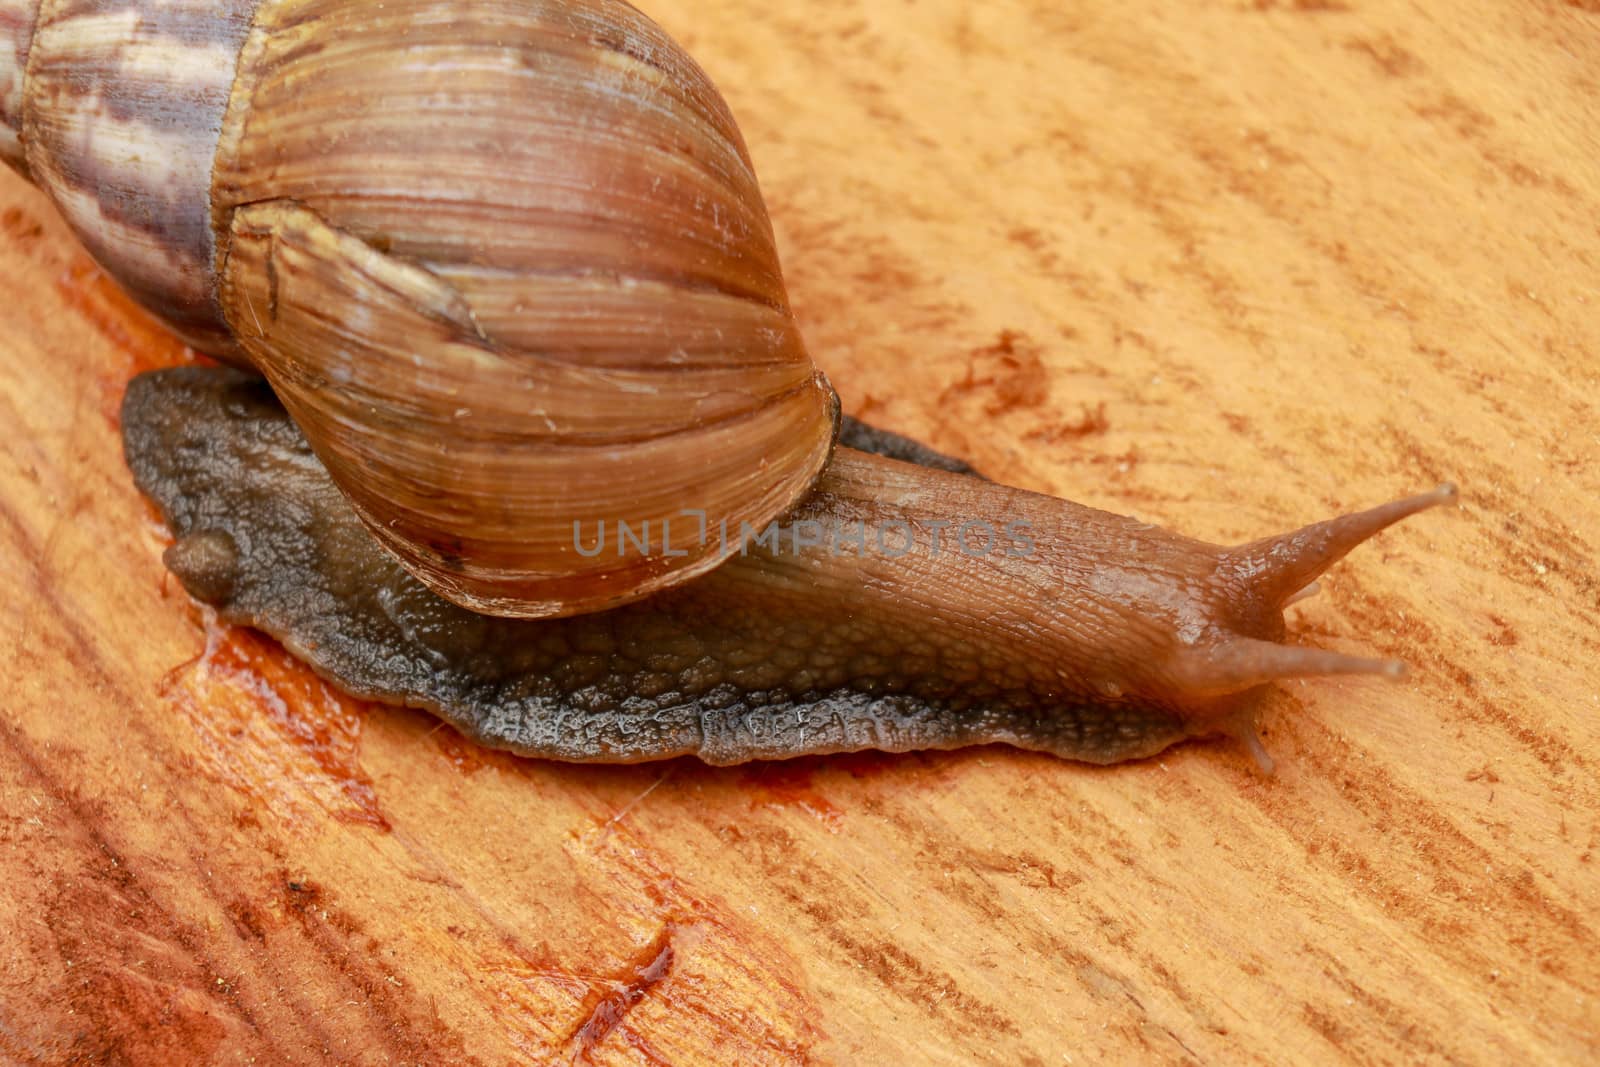 Top view of Snail Achatina fulica, African giant snail, Archachatina marginata with natural background. The Snail is on the wood.Beautiful patterned brown snail crawl on the wood surface. African snail shrugs.